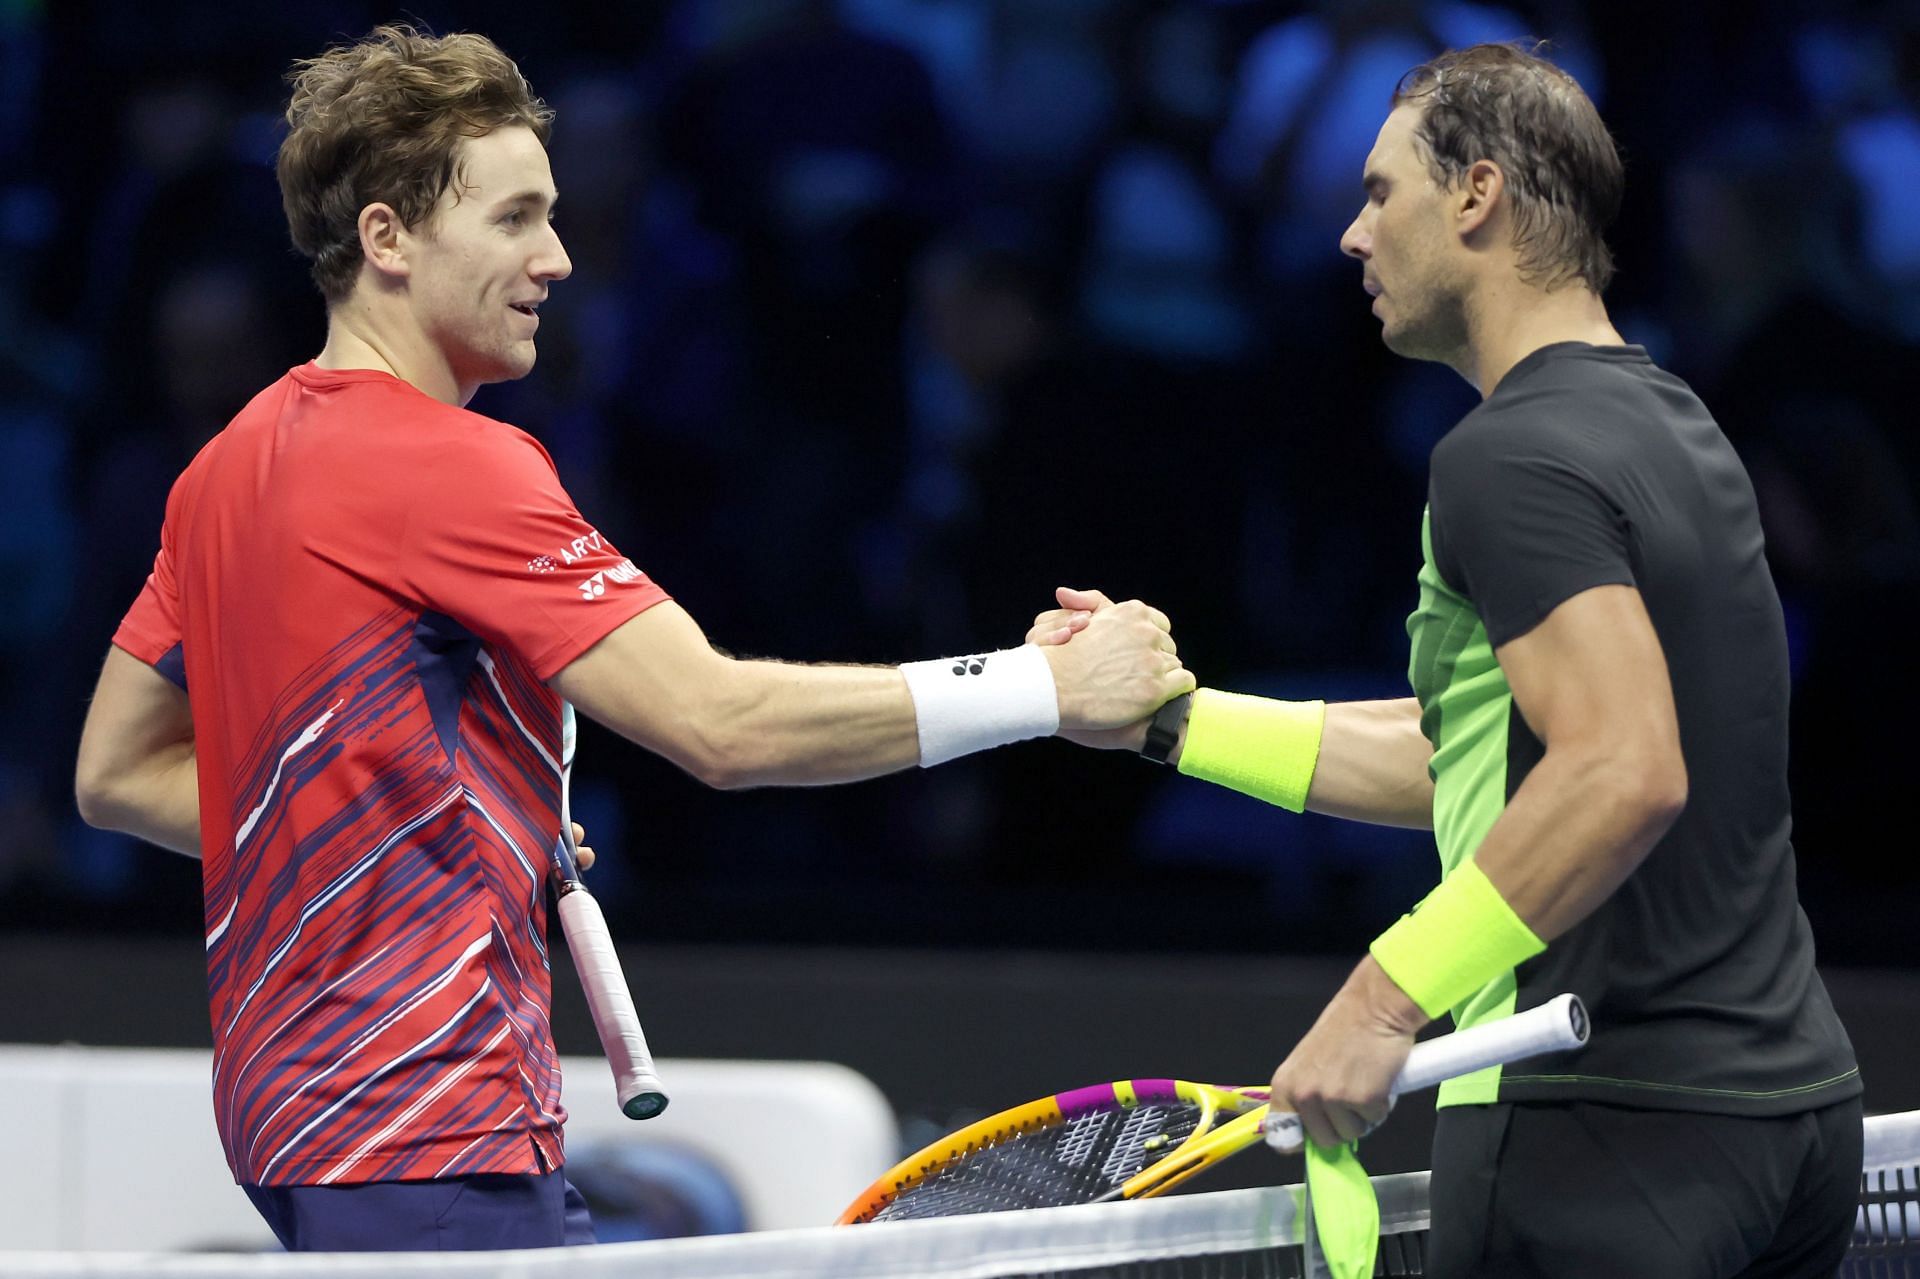 Casper Ruud and Rafael Nadal pictured at the 2022 Nitto ATP Finals - Day Five.